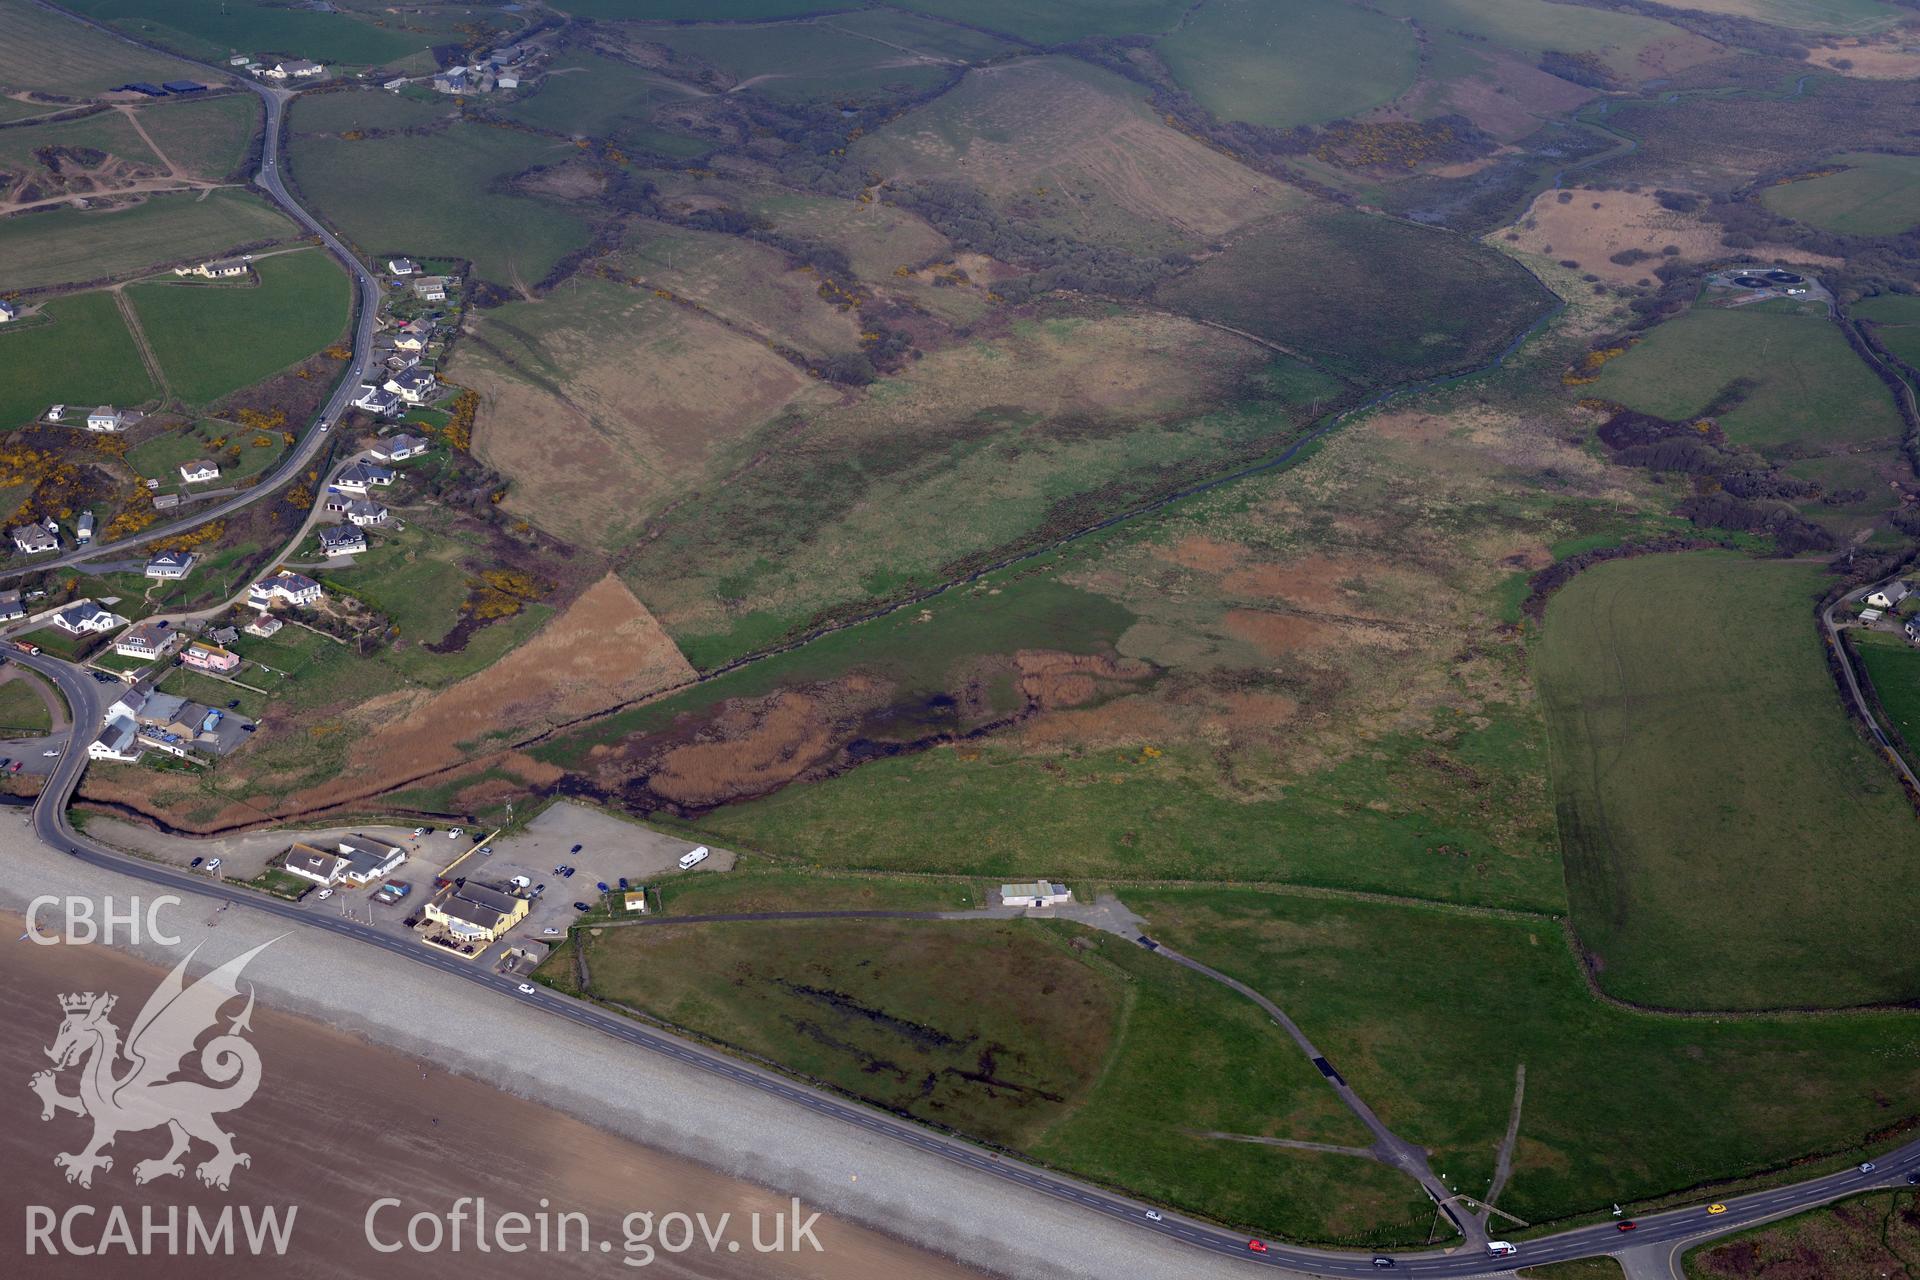 Aerial photography of Newgale taken on 27th March 2017.  Baseline aerial reconnaissance survey for the CHERISH Project. ? Crown: CHERISH PROJECT 2019. Produced with EU funds through the Ireland Wales Co-operation Programme 2014-2020. All material made freely available through the Open Government Licence.